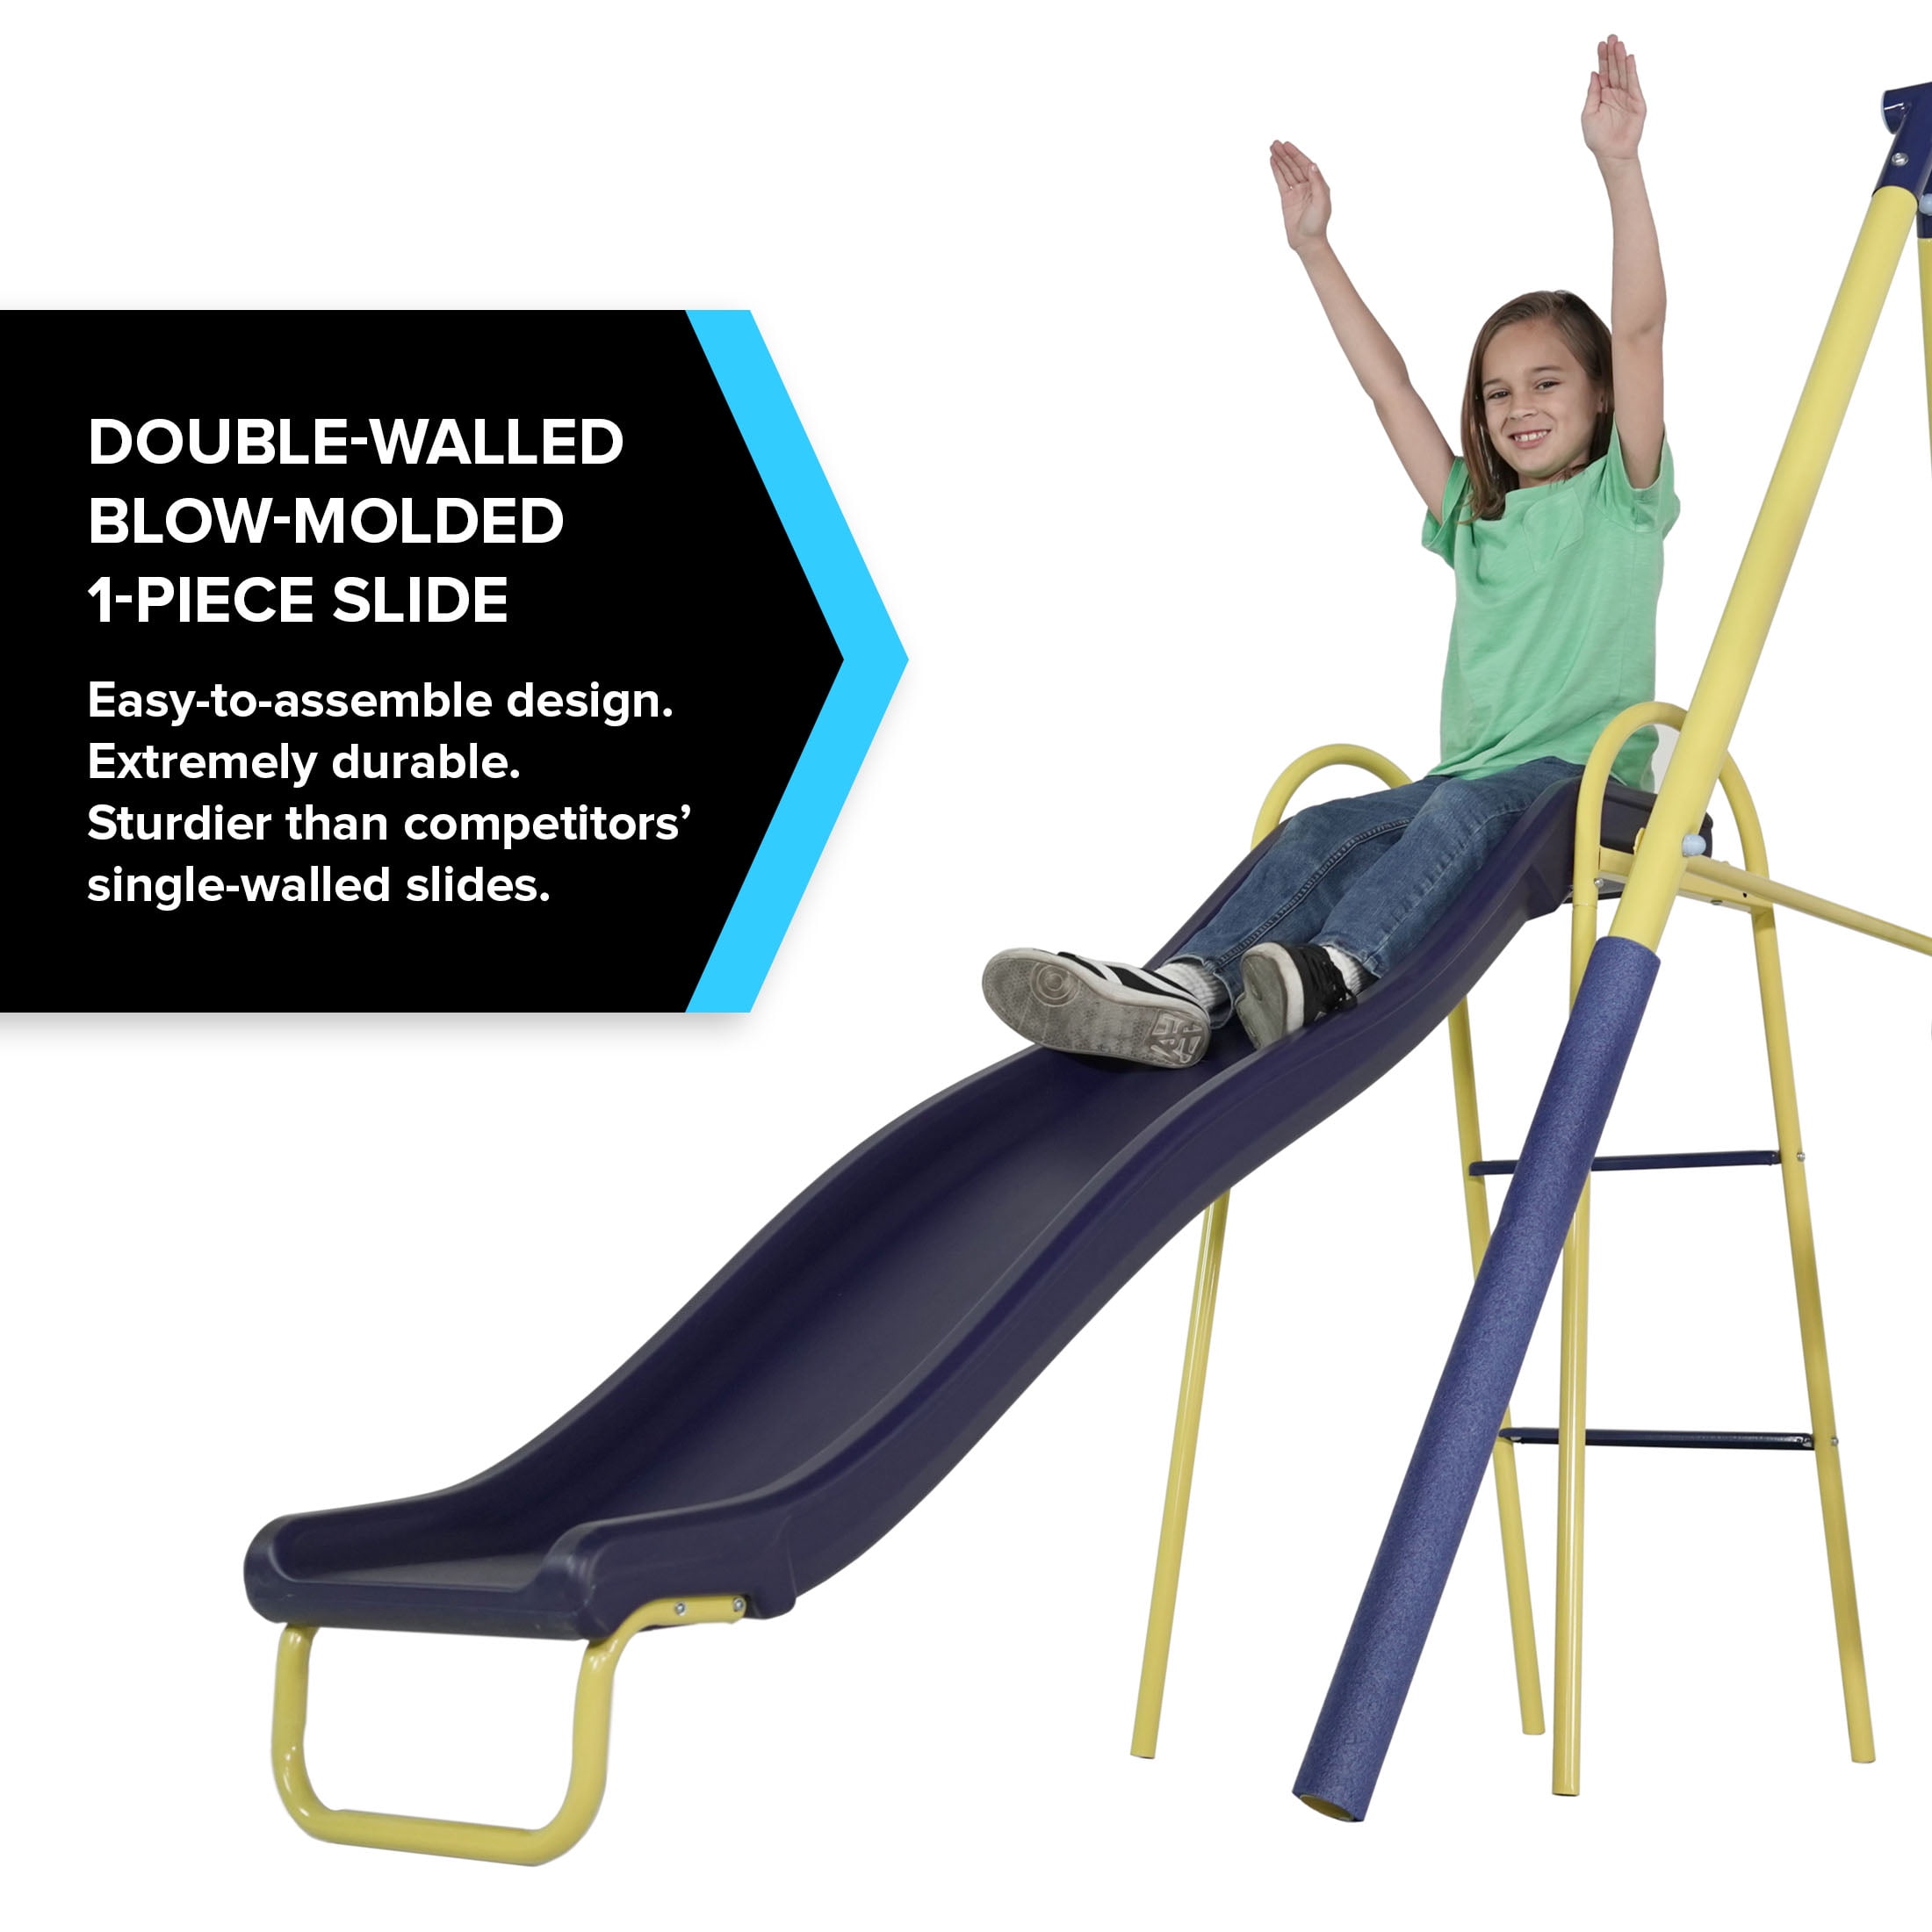 Sportspower Double Swing Glide and Slide Swing Outdoor fun Glide and Slide 